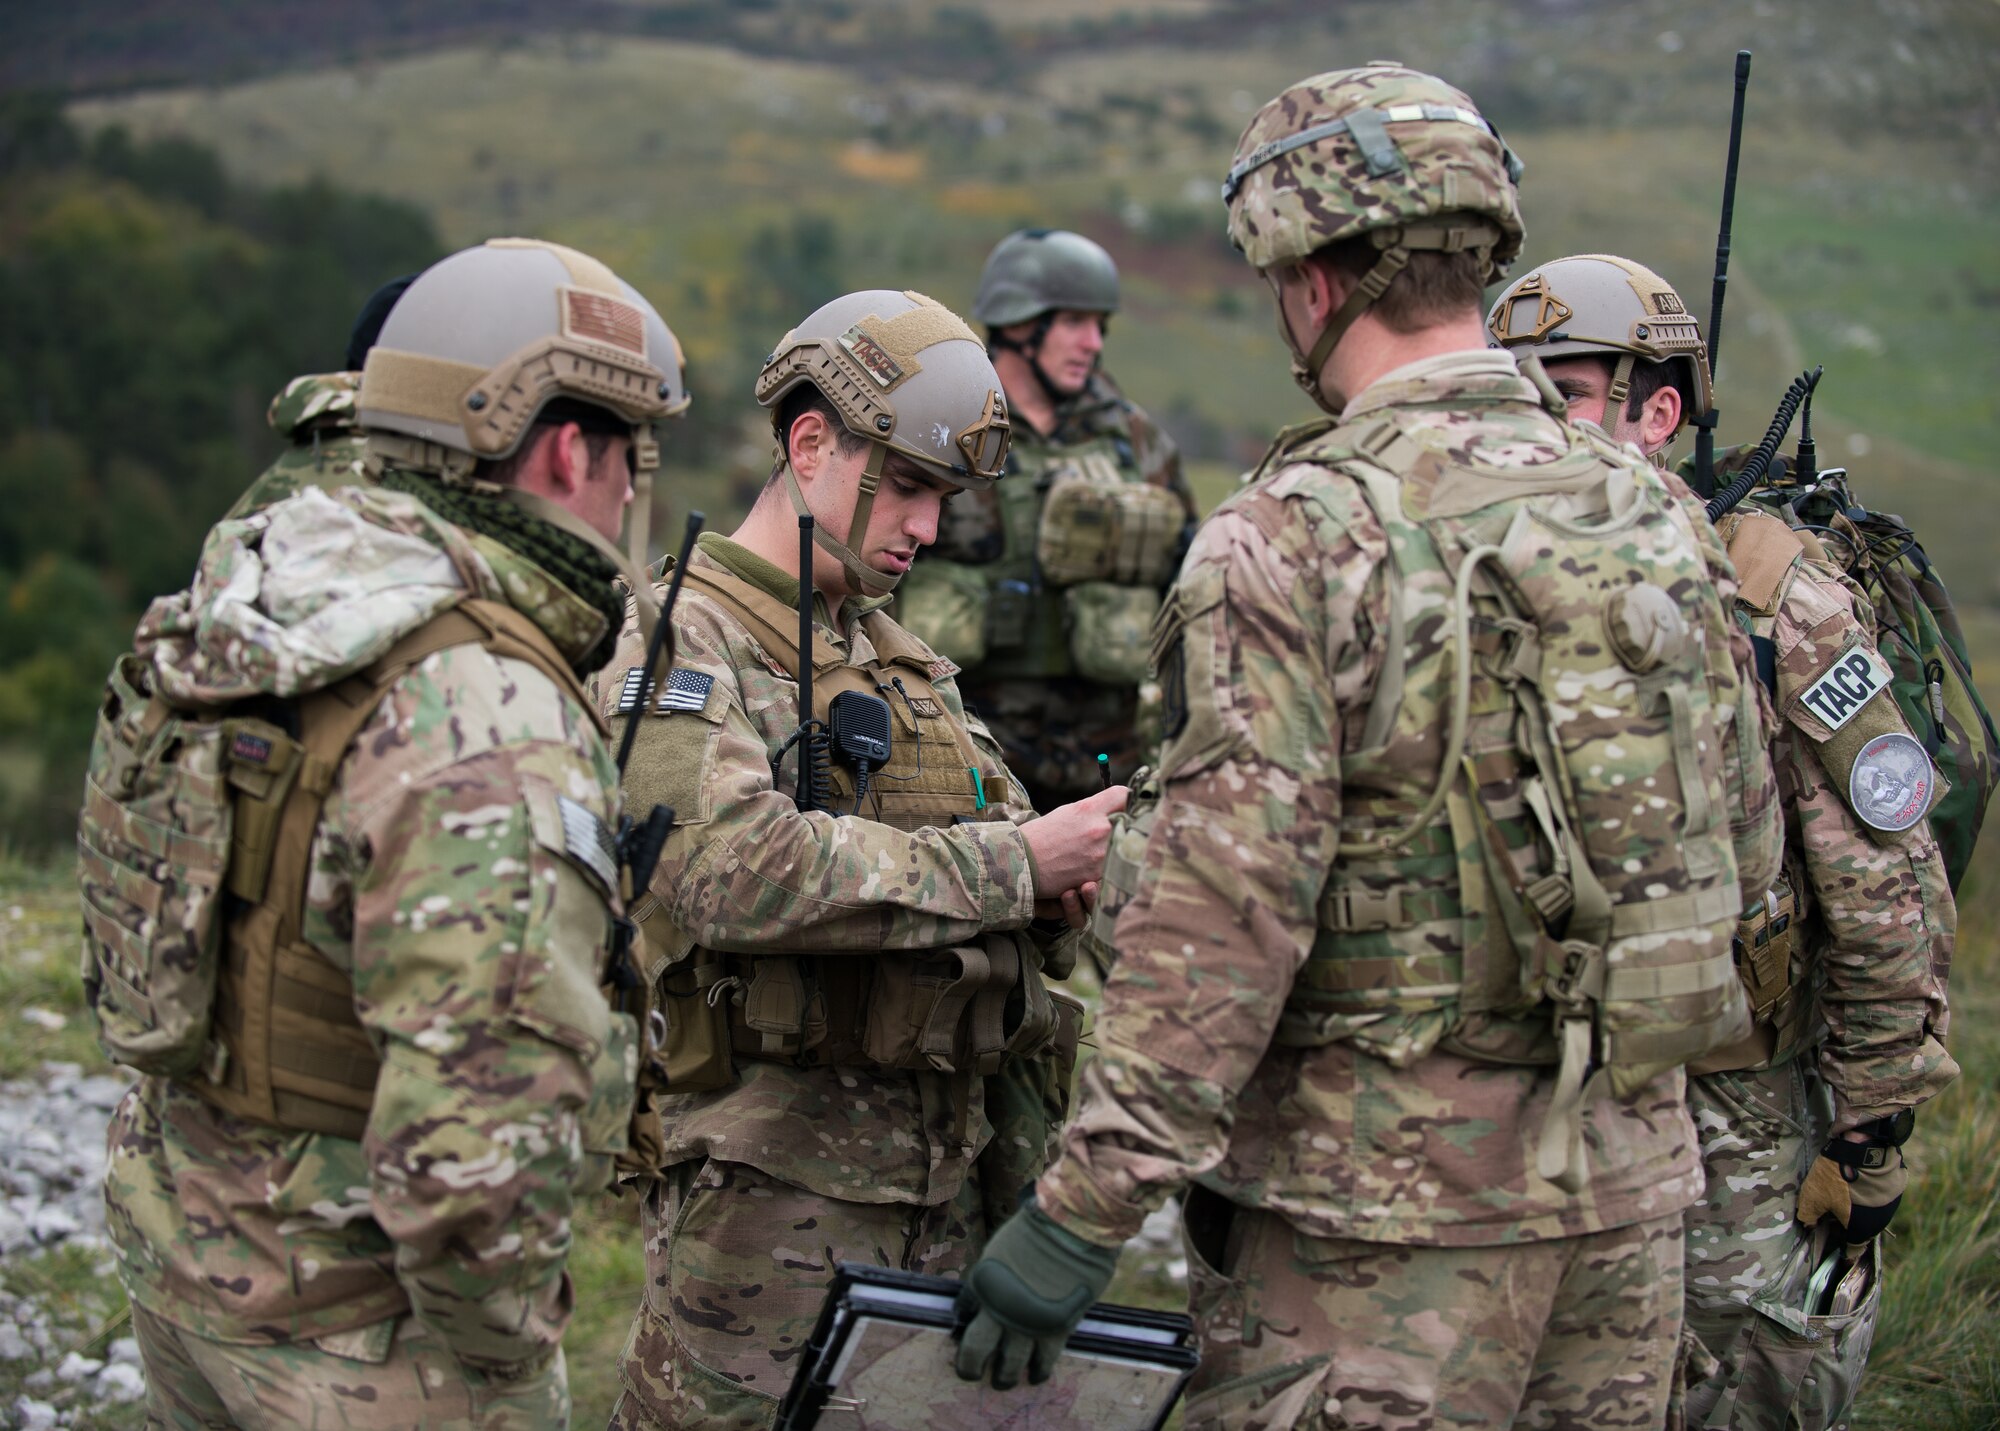 U.S Air Force Senior Airman Gage Duvall, 2nd Air Support Operations Squadron joint terminal attack controller in training, coordinates with U.S. Army soldiers during exercise Rock Proof V Oct. 16, 2015, at the Pocek Training Range, near Postojna, Slovenia. The 2nd ASOS provided close air support for the 2nd Battalion, 503rd Infantry Regiment. (U.S. Air Force photo/Staff Sgt. Armando A. Schwier-Morales)